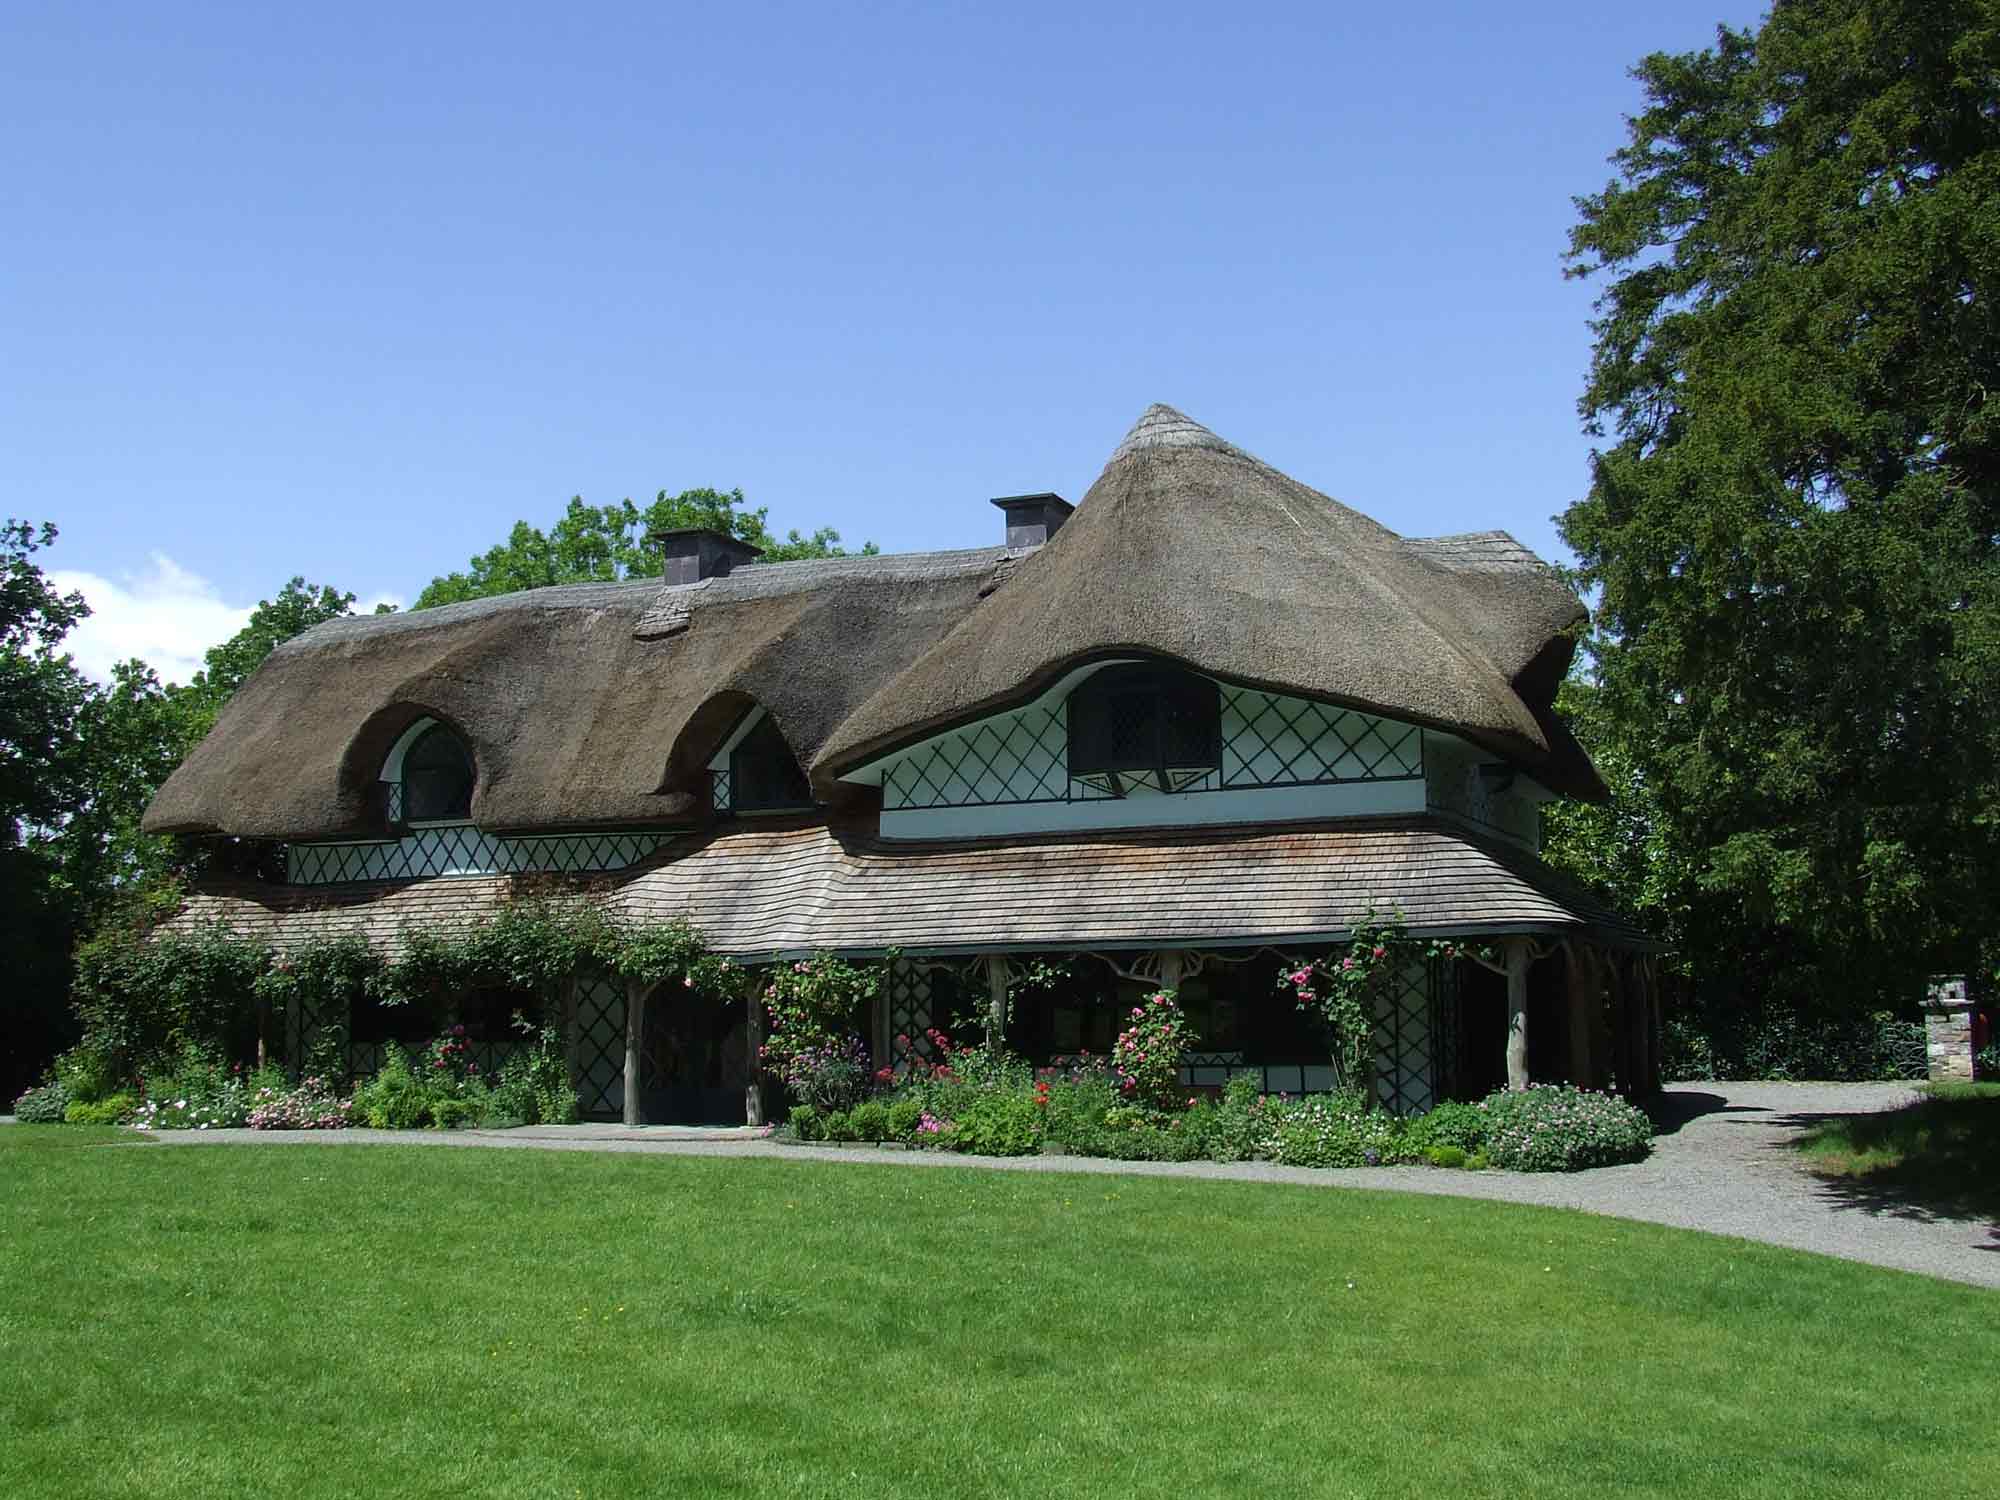 Click here for more info on the Swiss Cottage.